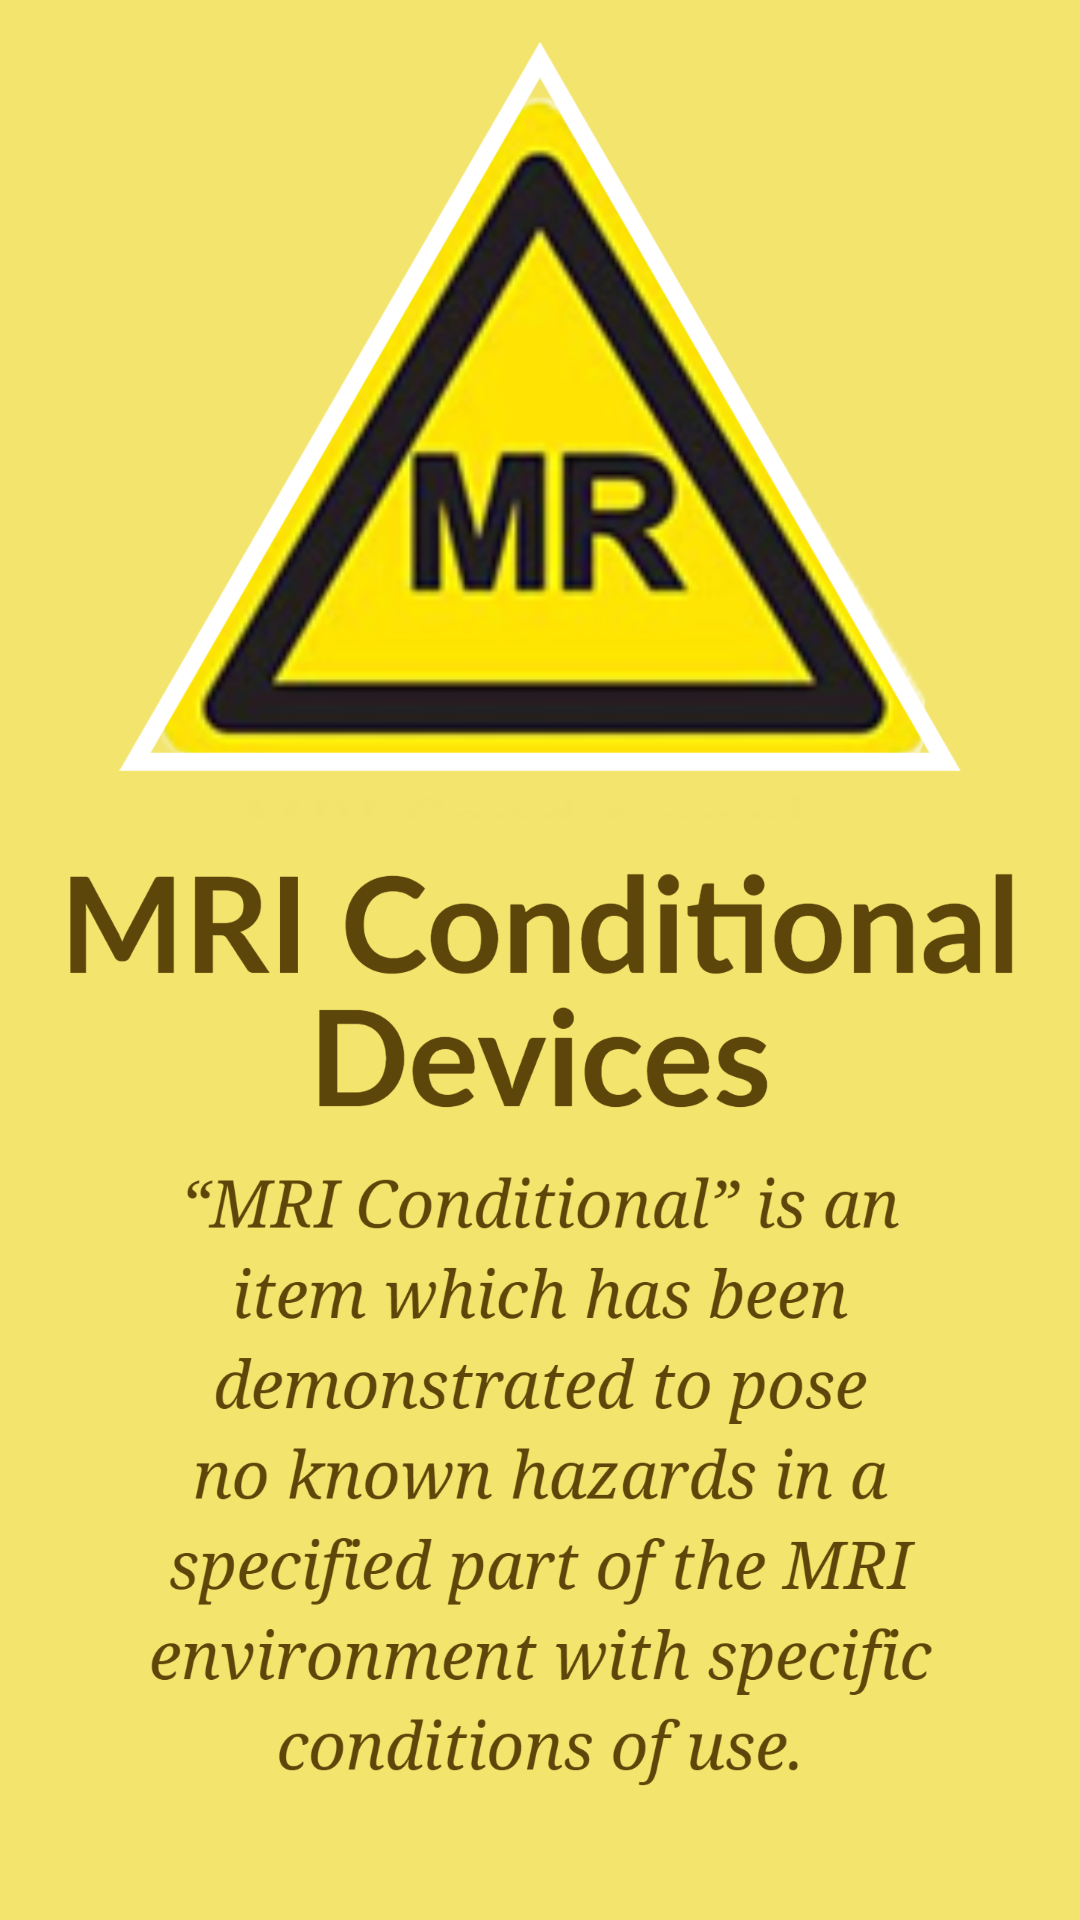 Solid yellow "warning" background with a symbol of a yellow triangle with the letters MR. Underneath in large print "MRI Conditional Devices" and then is smaller print "“MRI Conditional” is an item which has been demonstrated to pose no known hazards in a specified part of the MRI environment with specific conditions of use."